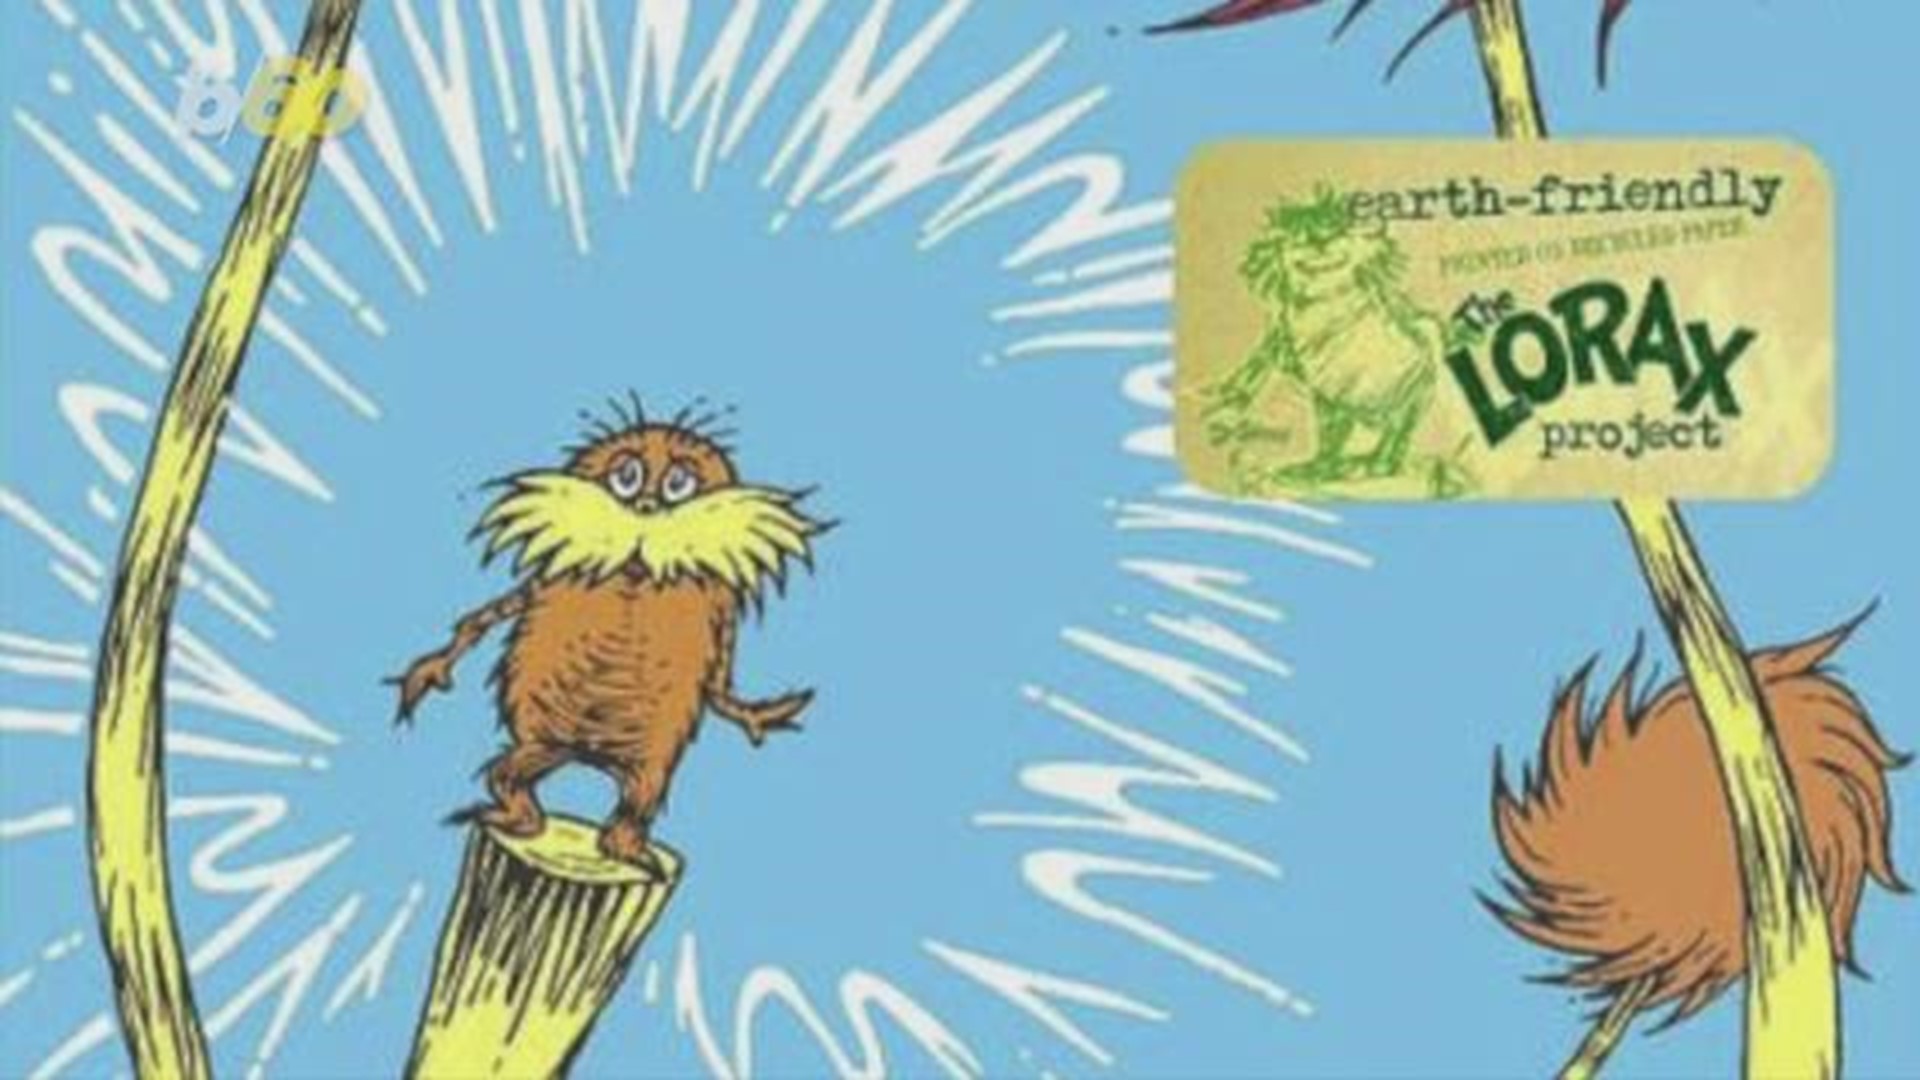 Dr. Seuss had writer's block until he went to Africa in the 1970s and got the idea for the fictional Lorax character, which is based on the real-life patas monkey, according to a new study. Buzz60's Sean Dowling has more.